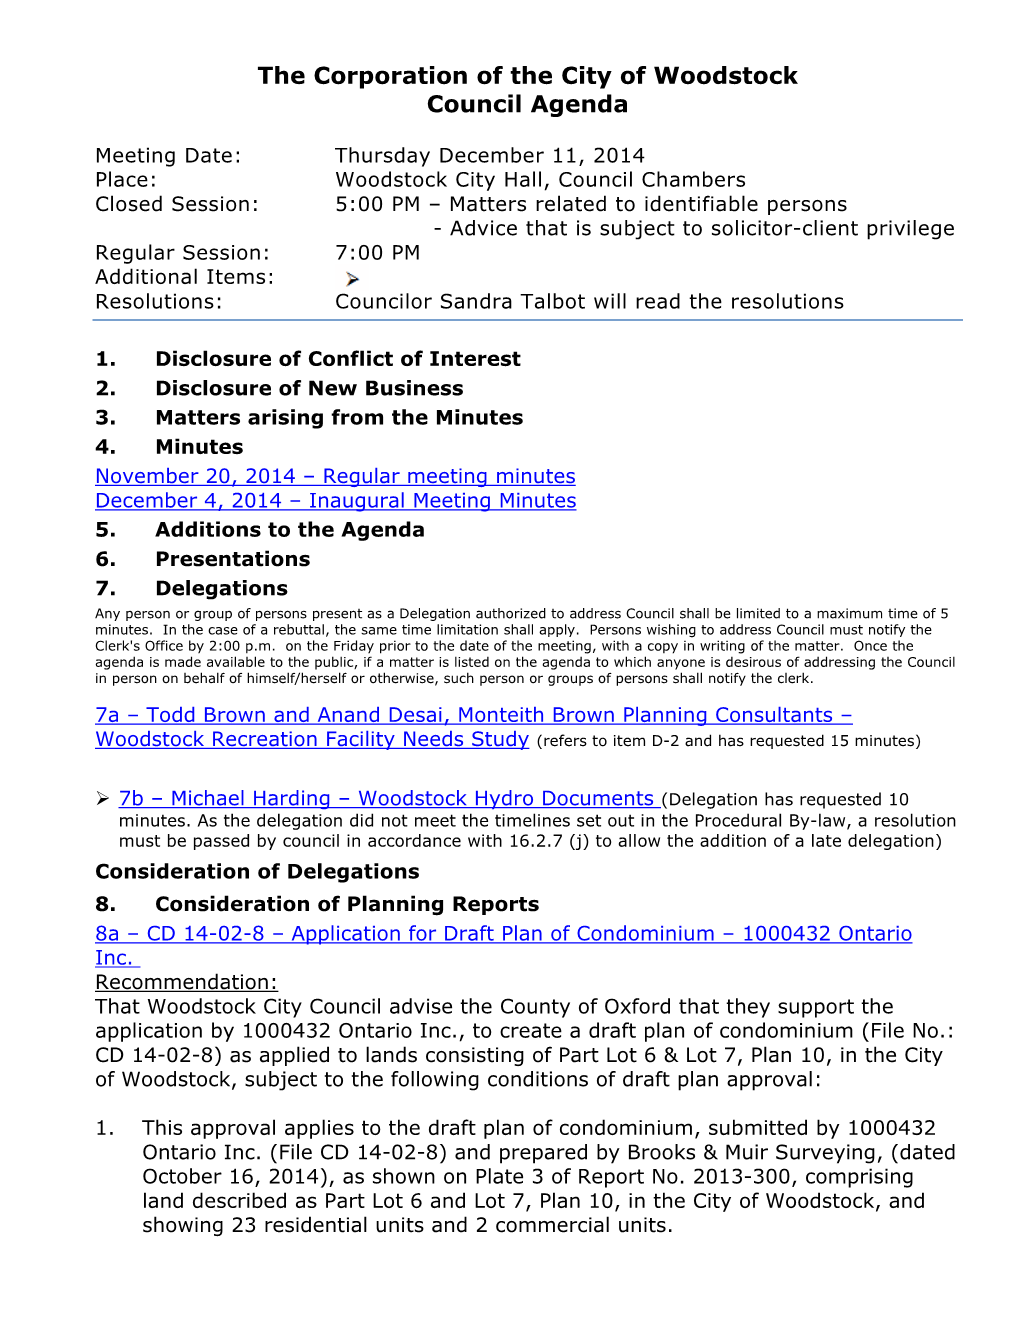 The Corporation of the City of Woodstock Council Agenda